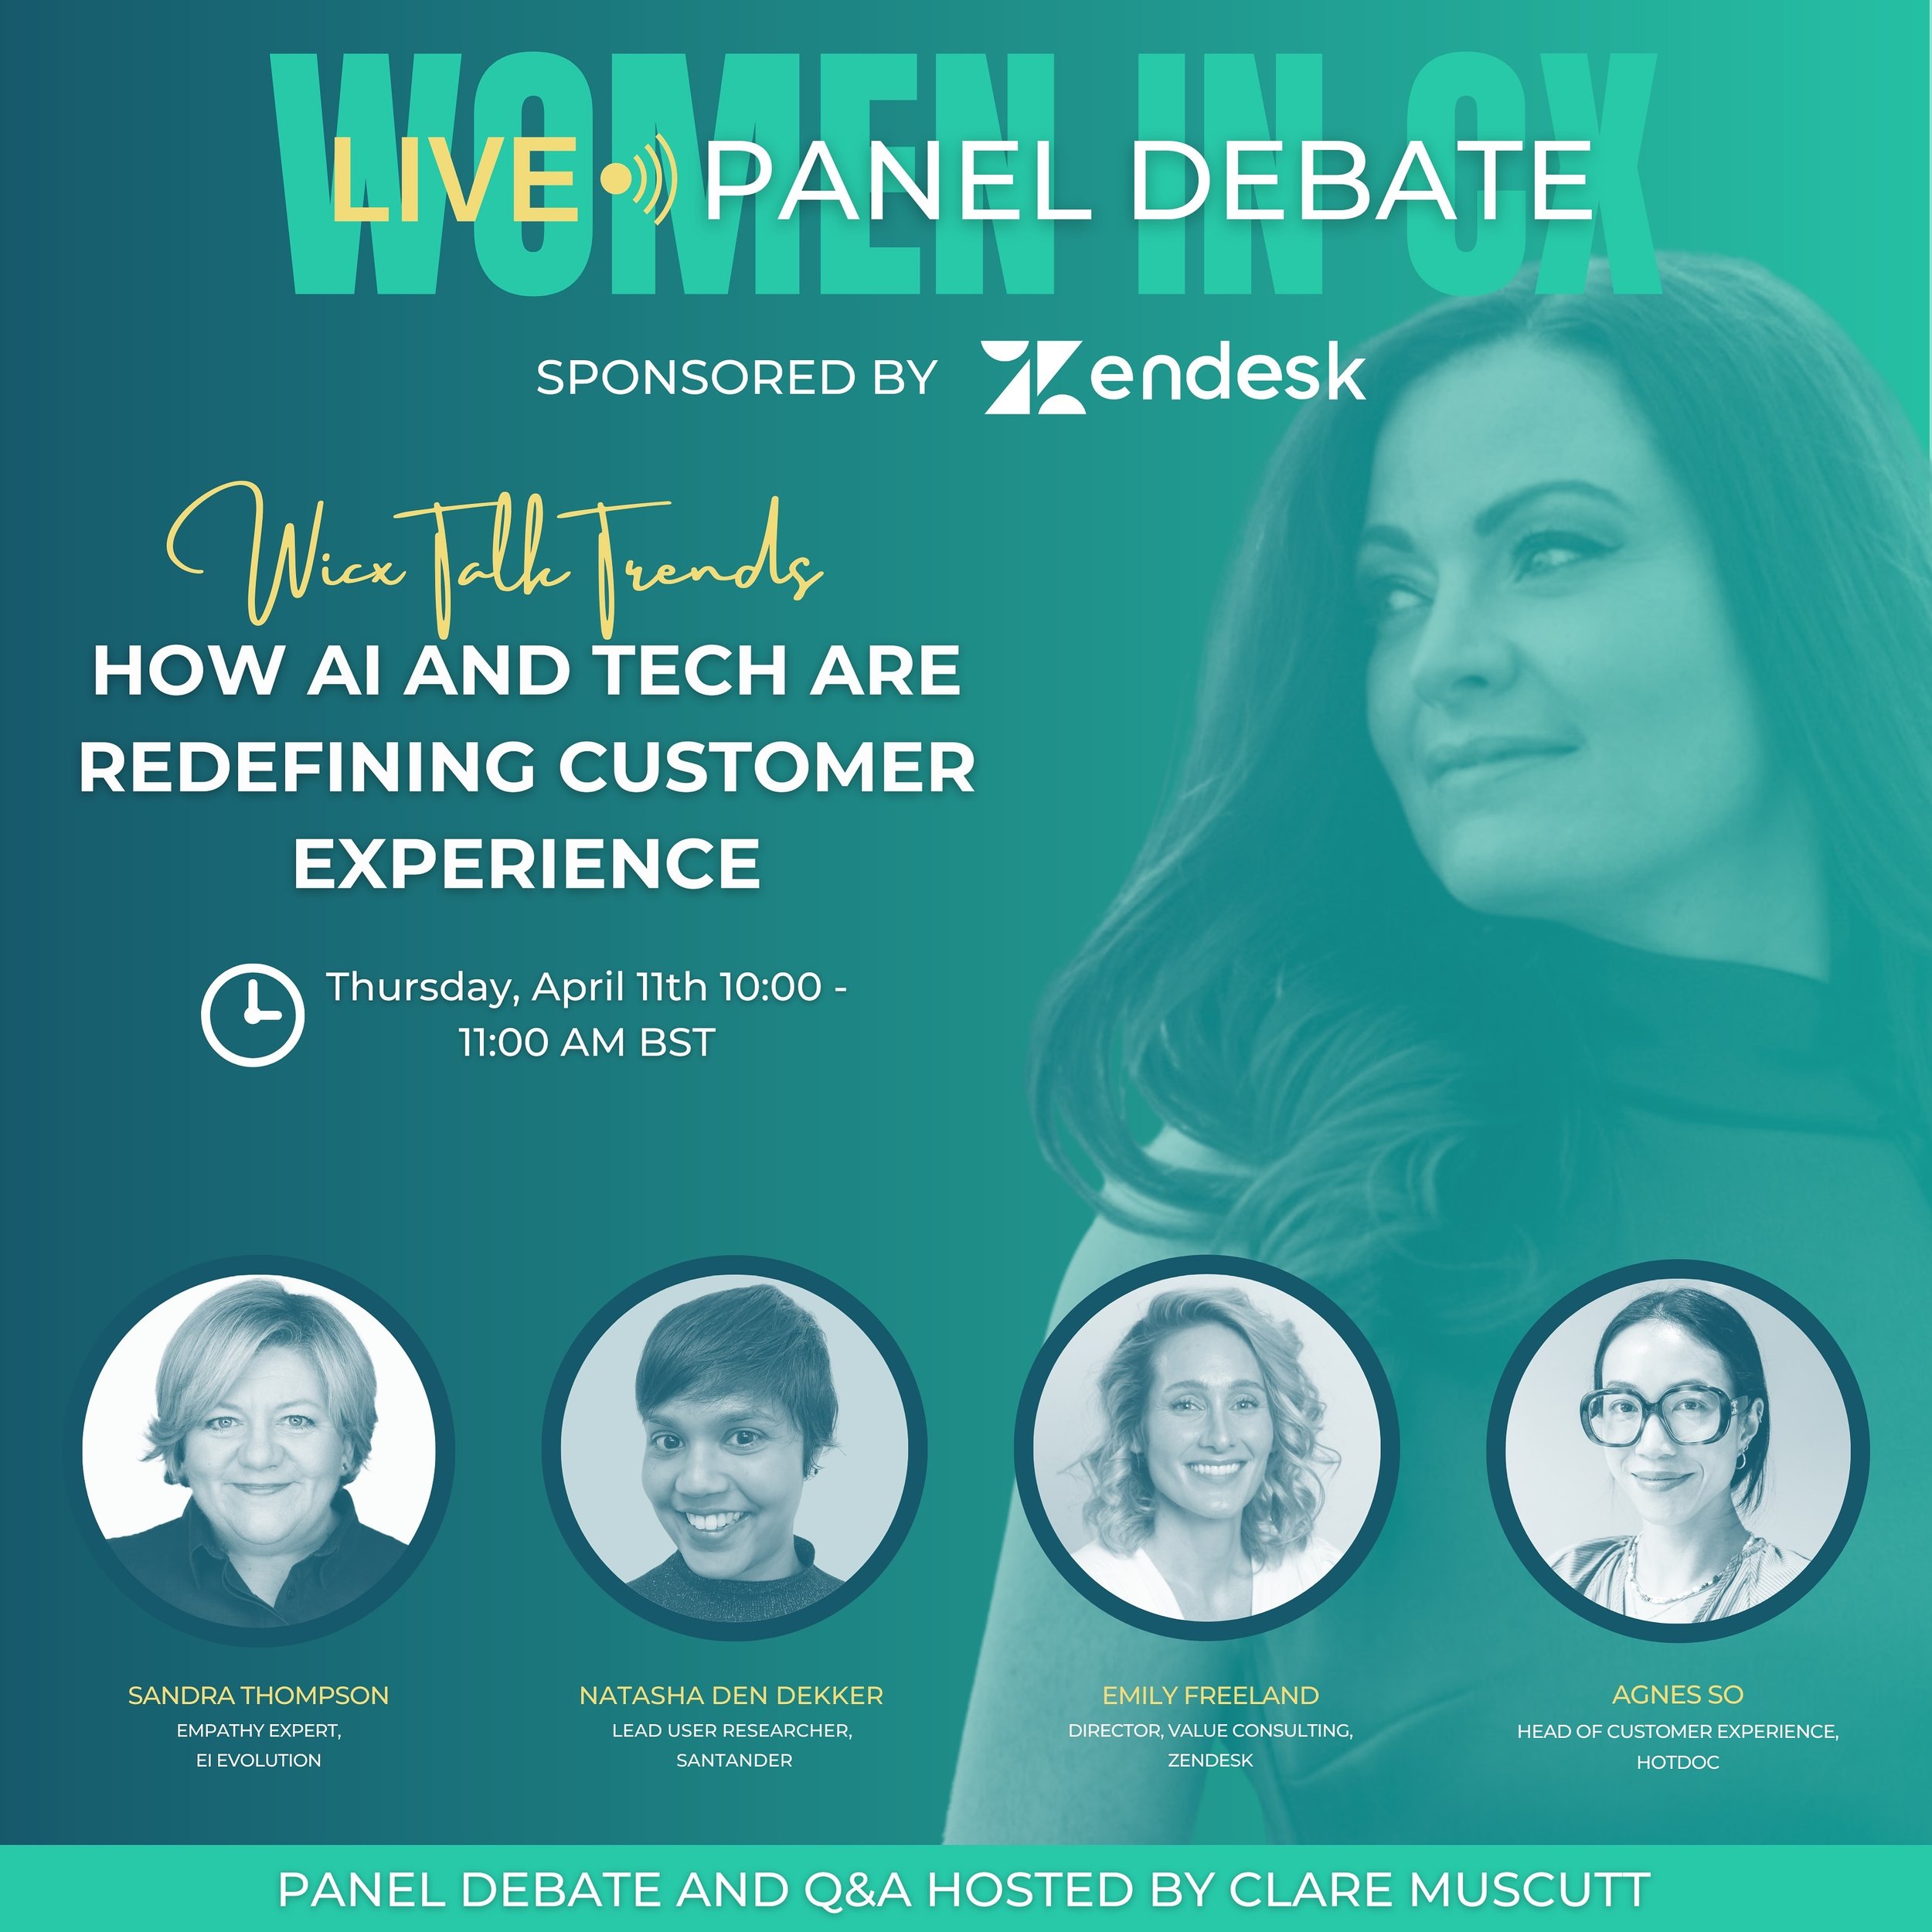 Trust us, you don&rsquo;t want to miss this. 👀
&nbsp;
Collaborating with @zendesk to bring you the freshest insights hot off the press, join us at 10 AM BST tomorrow for our FREE panel discussion, &lsquo;WiCX Talk Trends: How AI and Technology are R